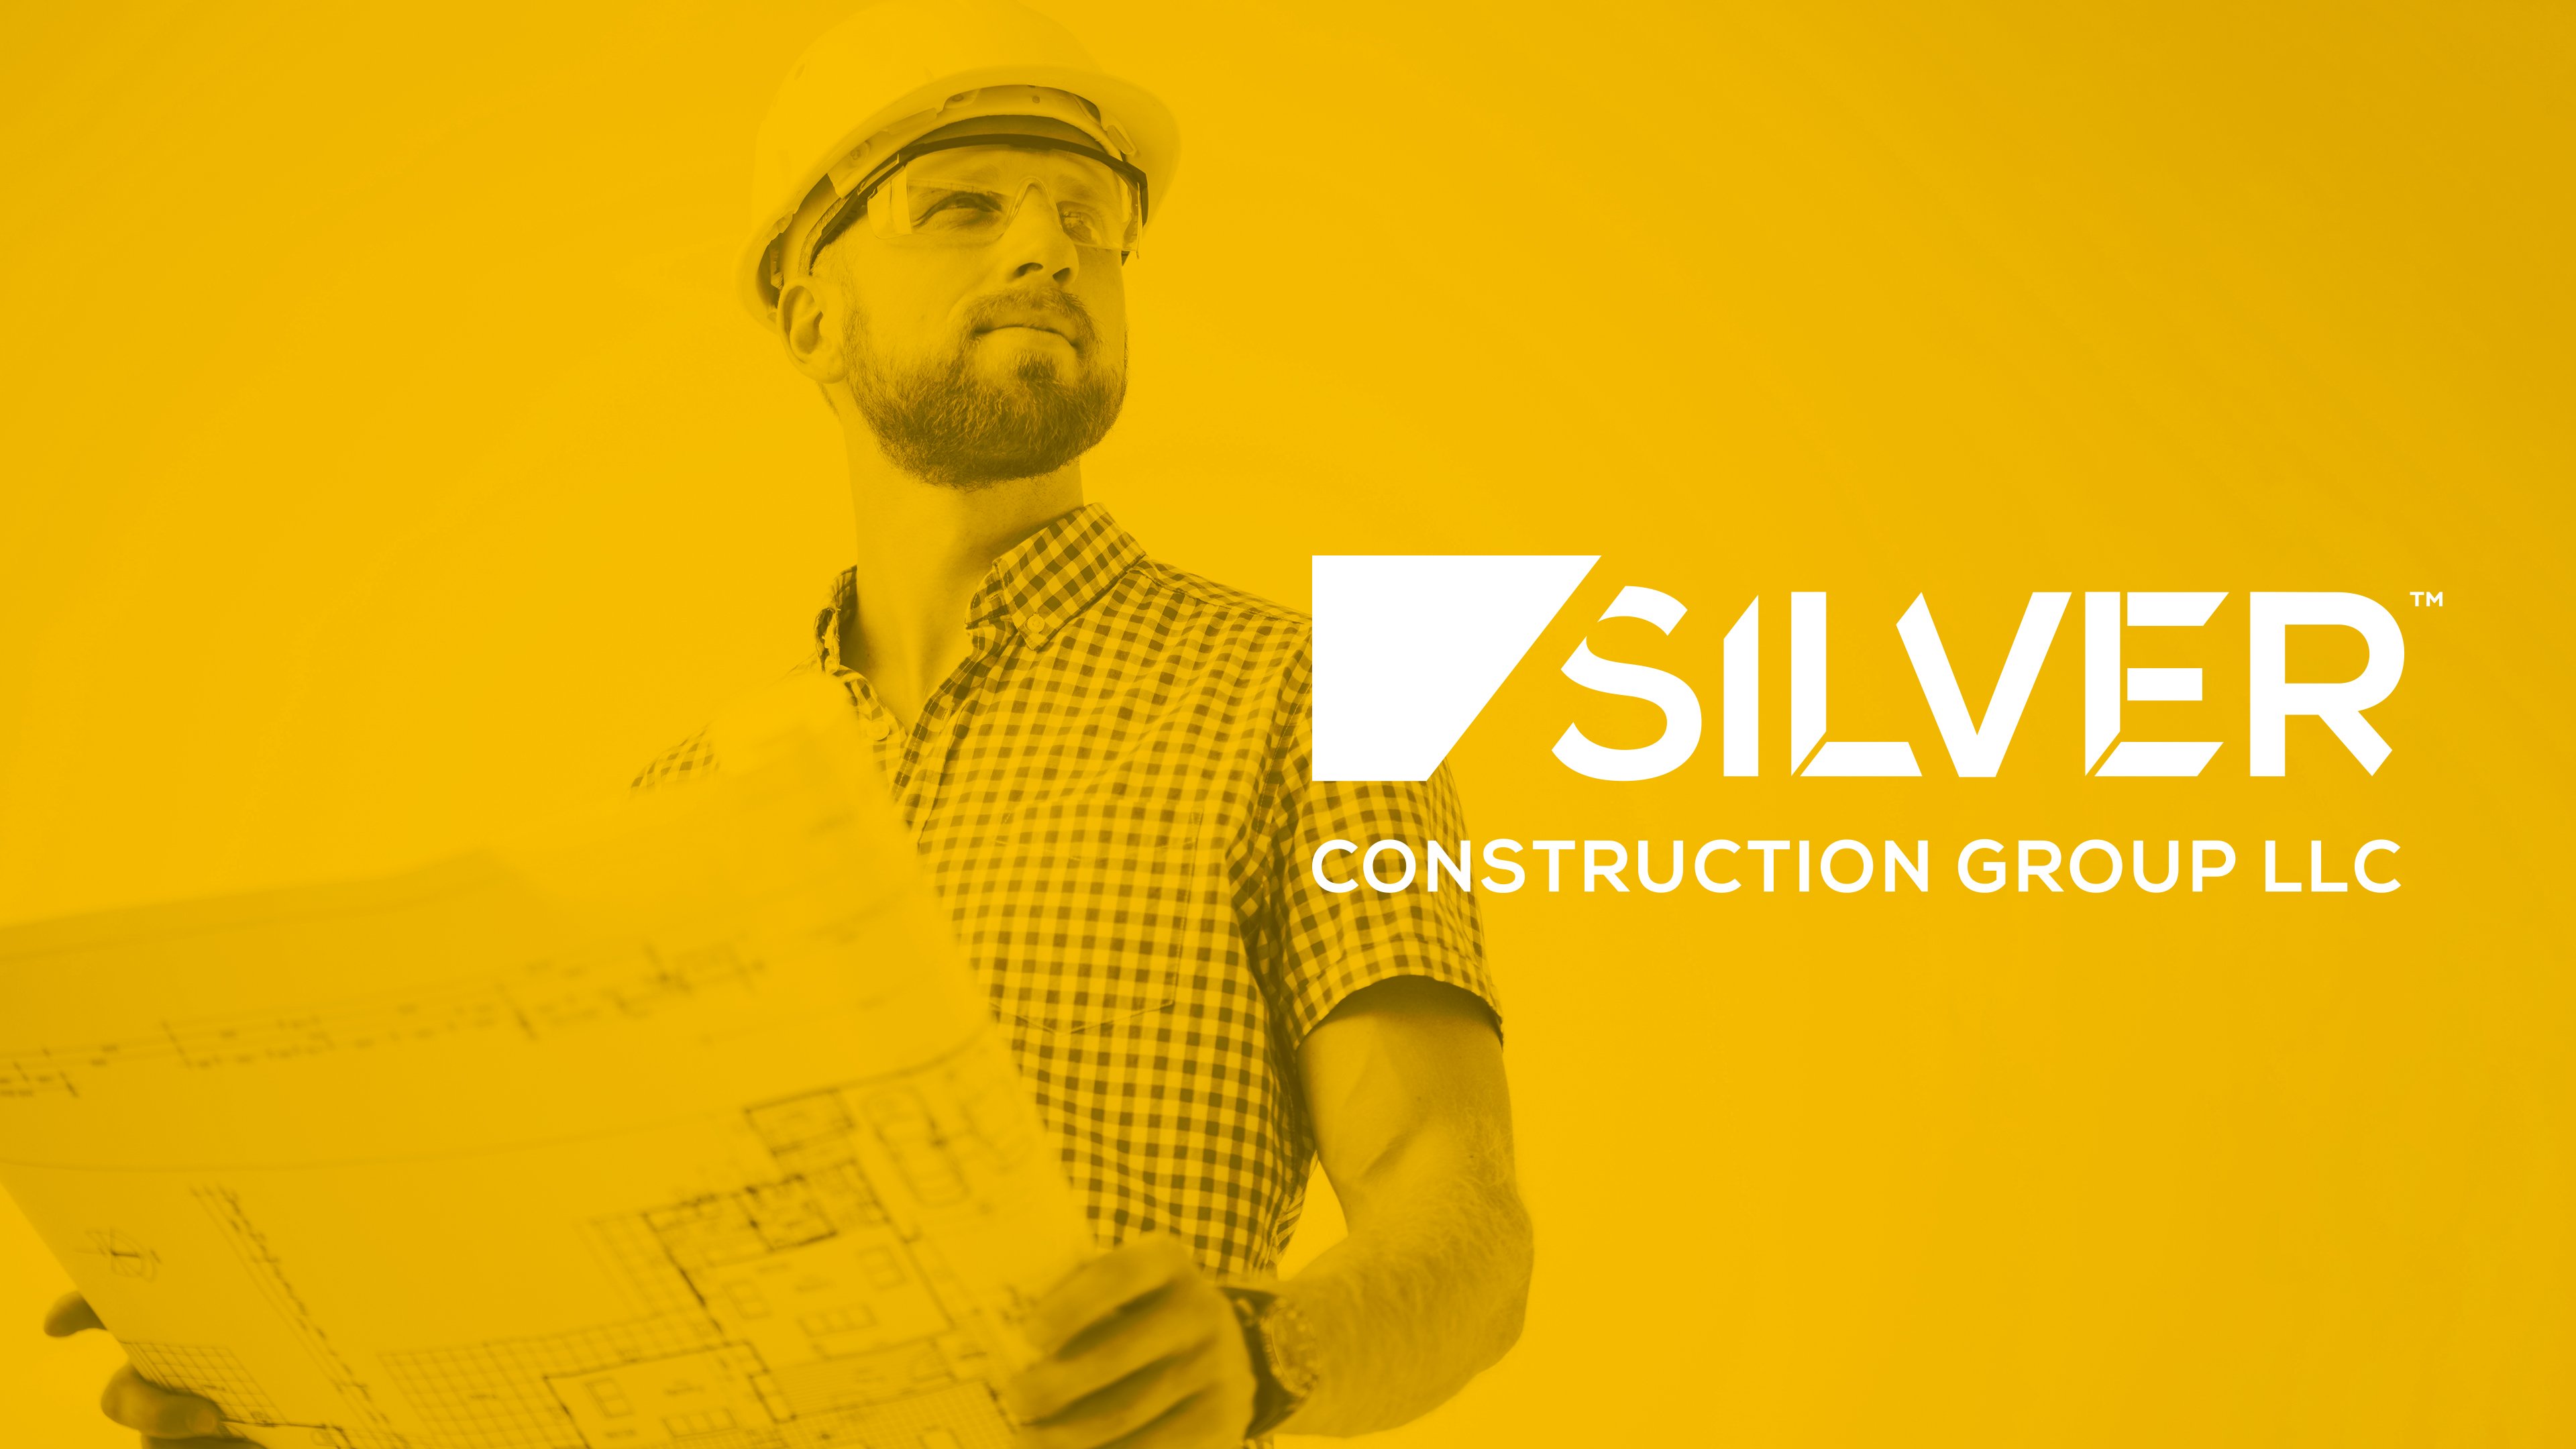 Silver Construction - logo feature image.